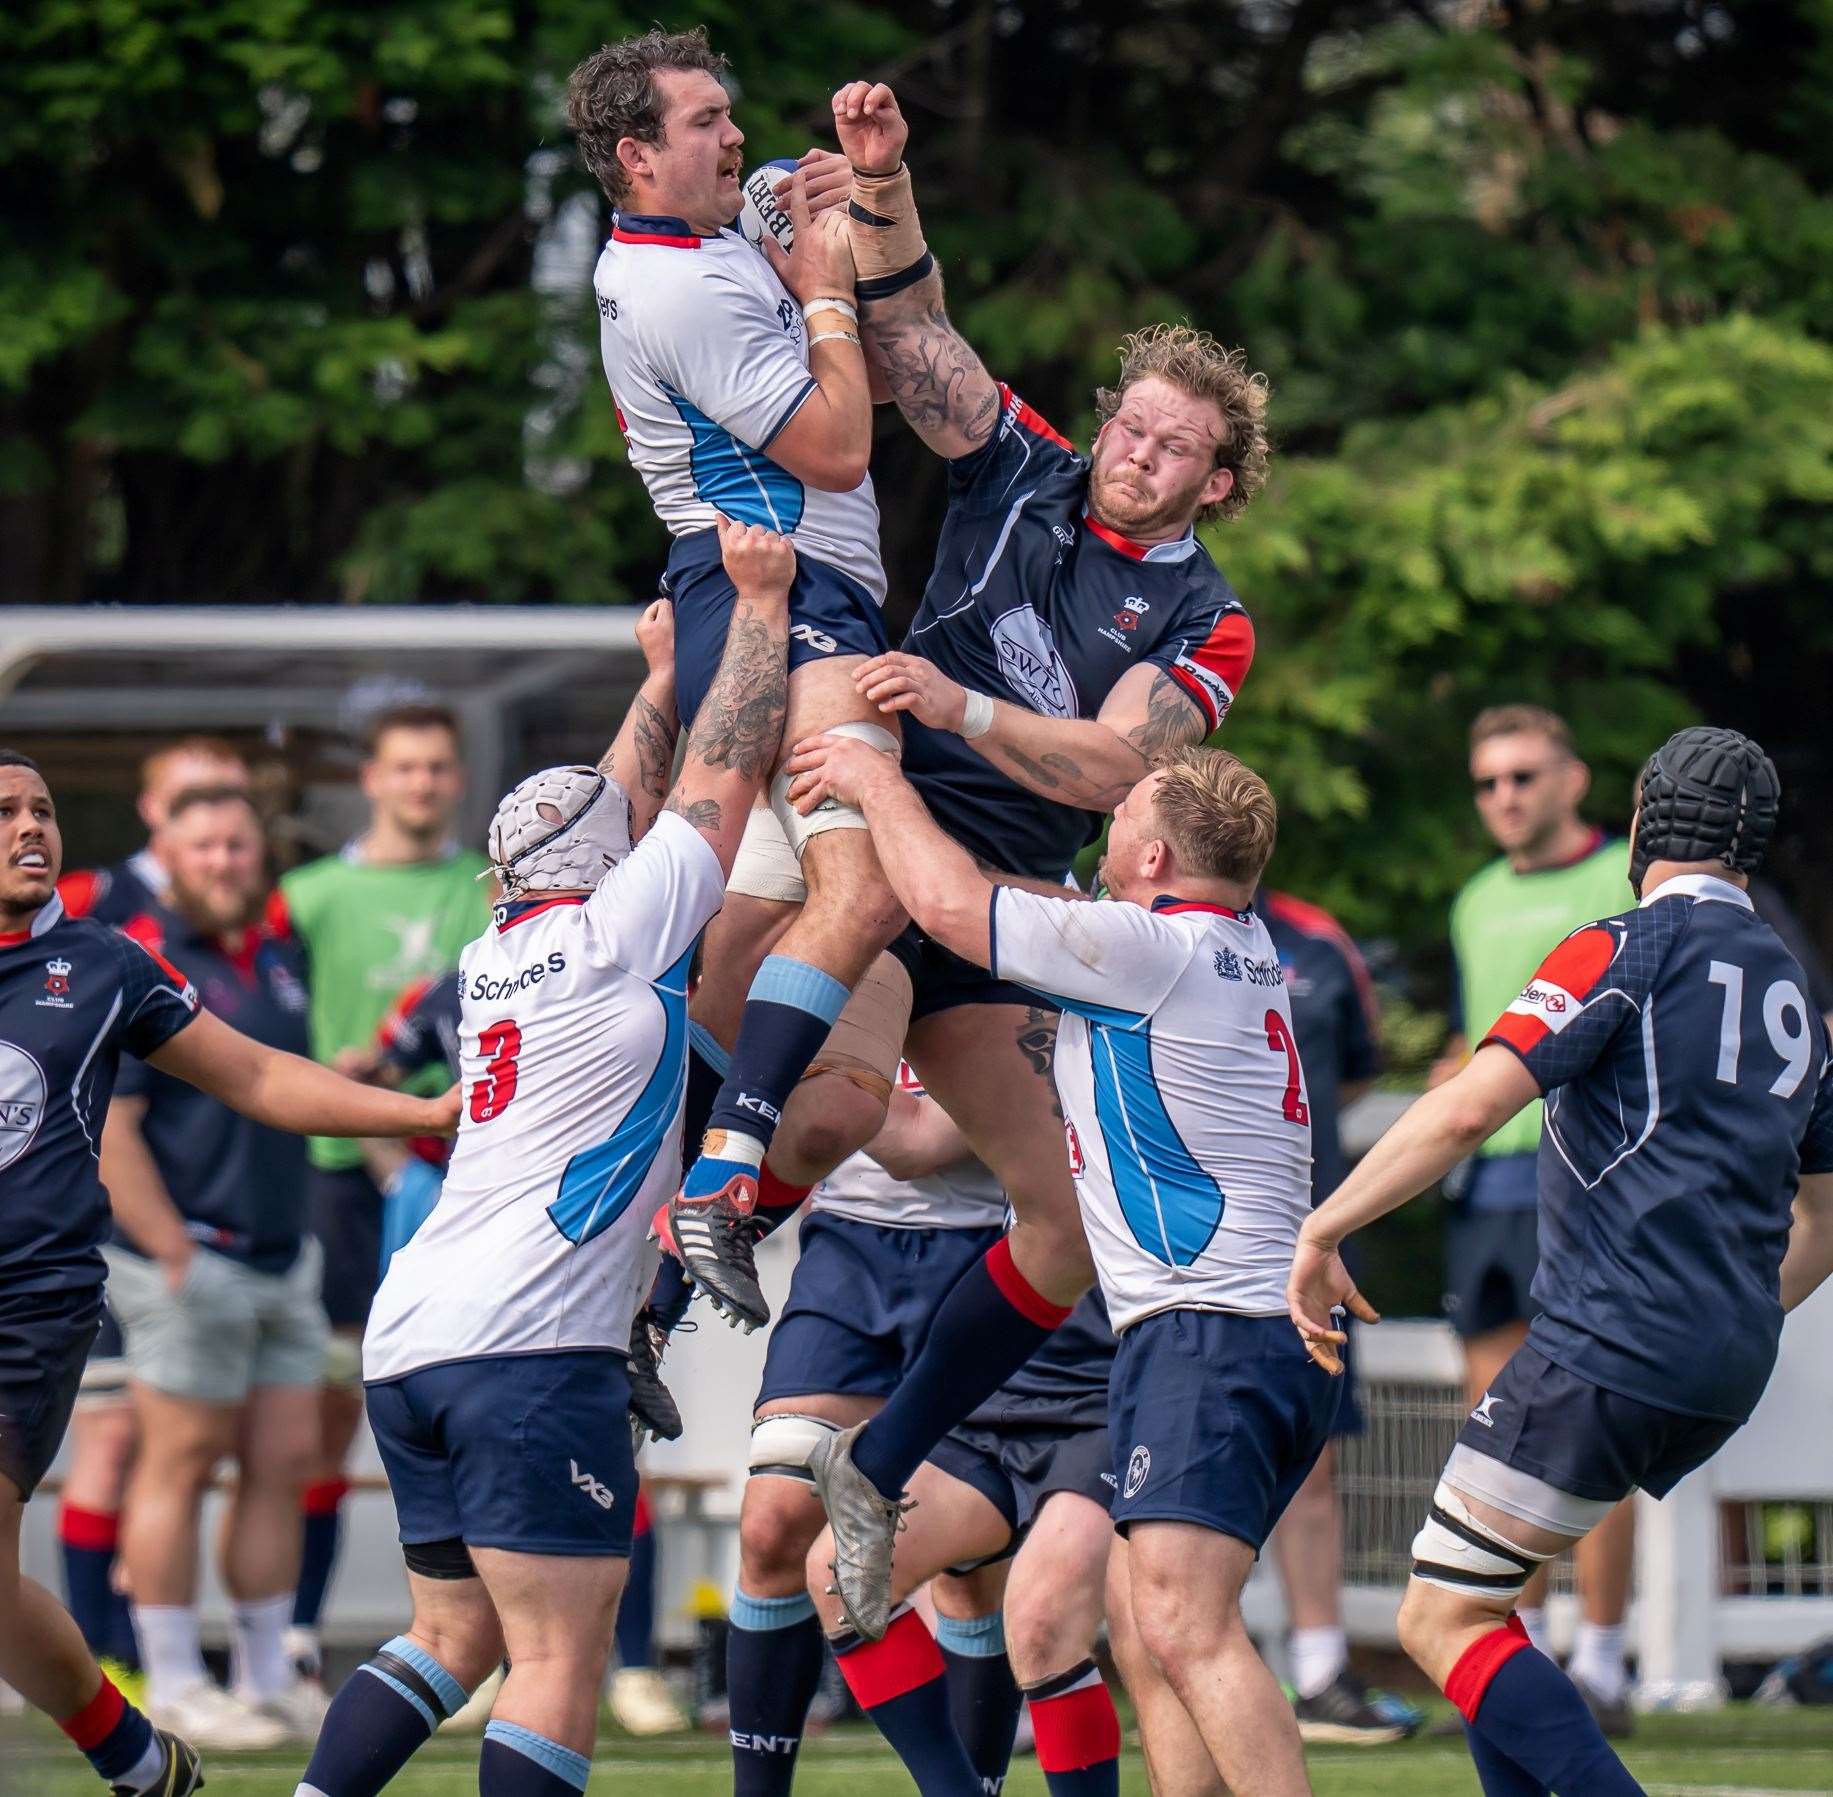 Kent's Charlie Self wins lineout ball. Picture: Andy Wales